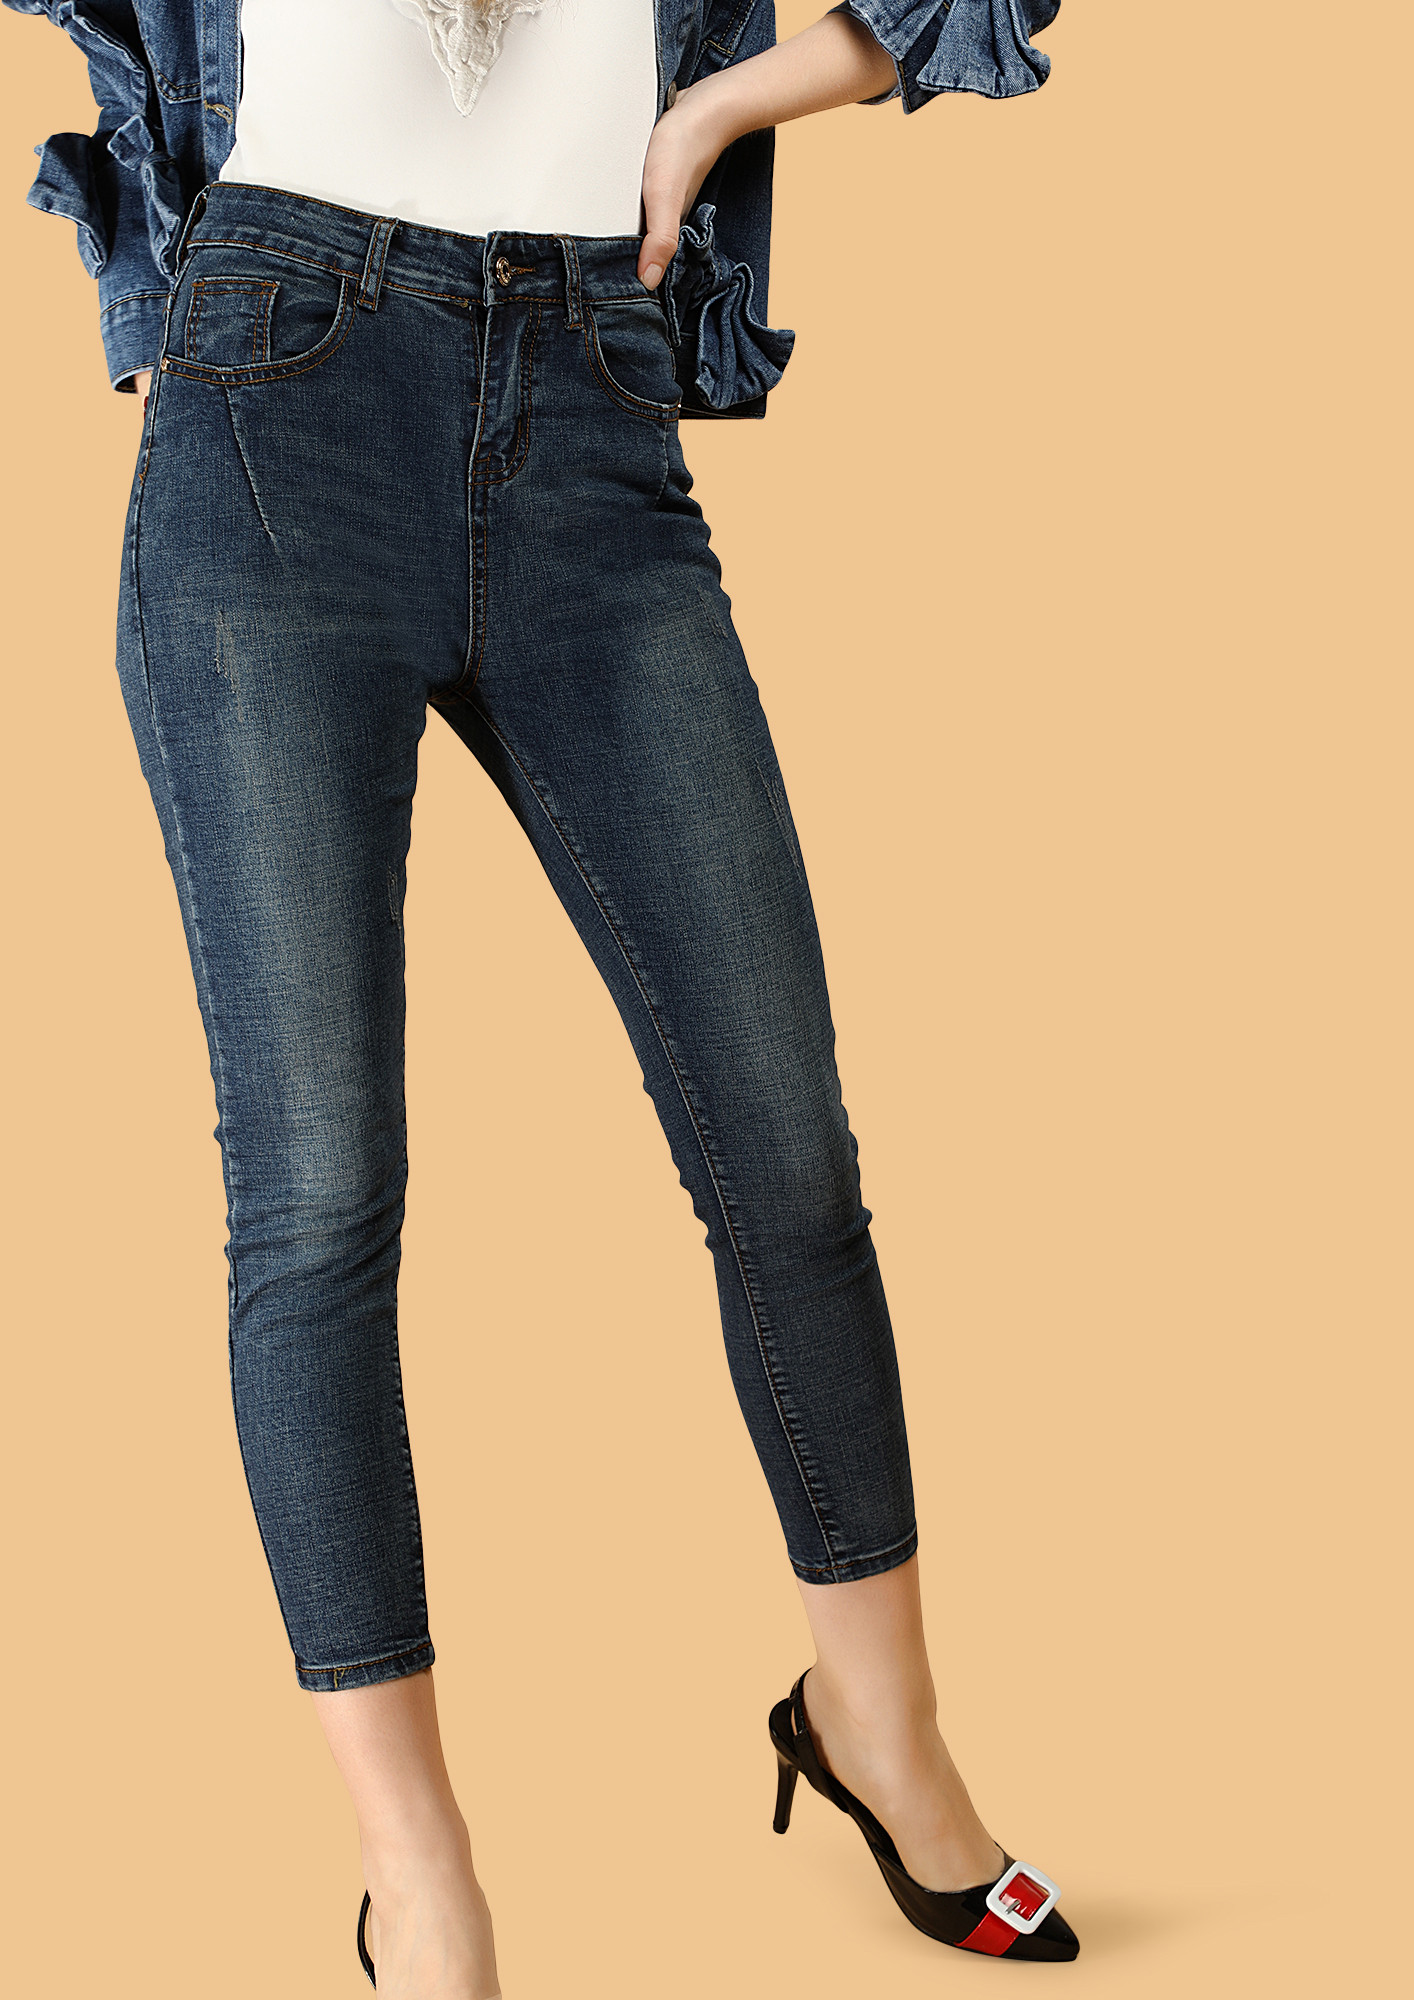 THE EVER-SO-CLASSIC BLUE SKINNY JEANS